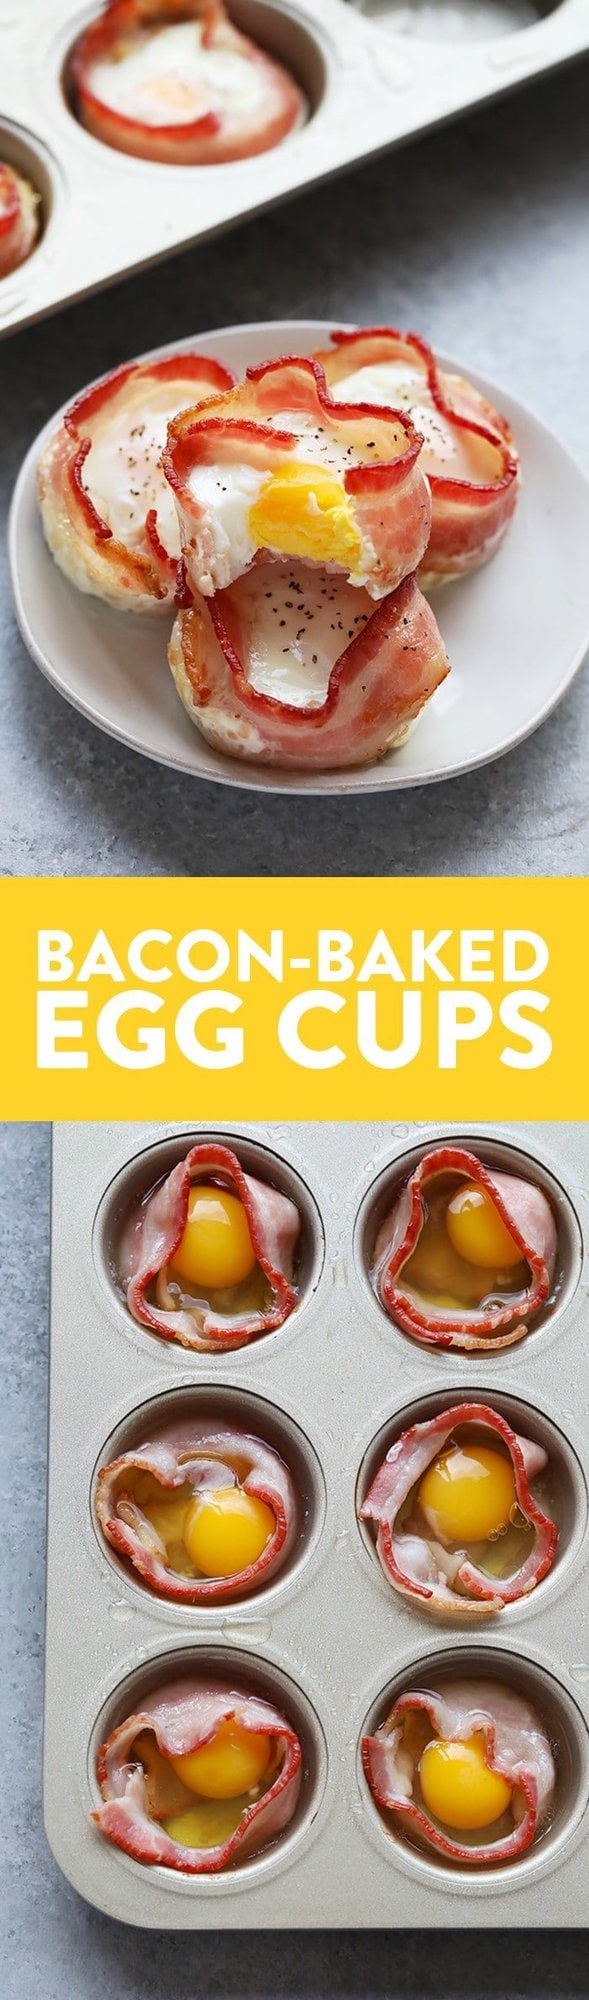 Bacon Wrapped Egg Cups